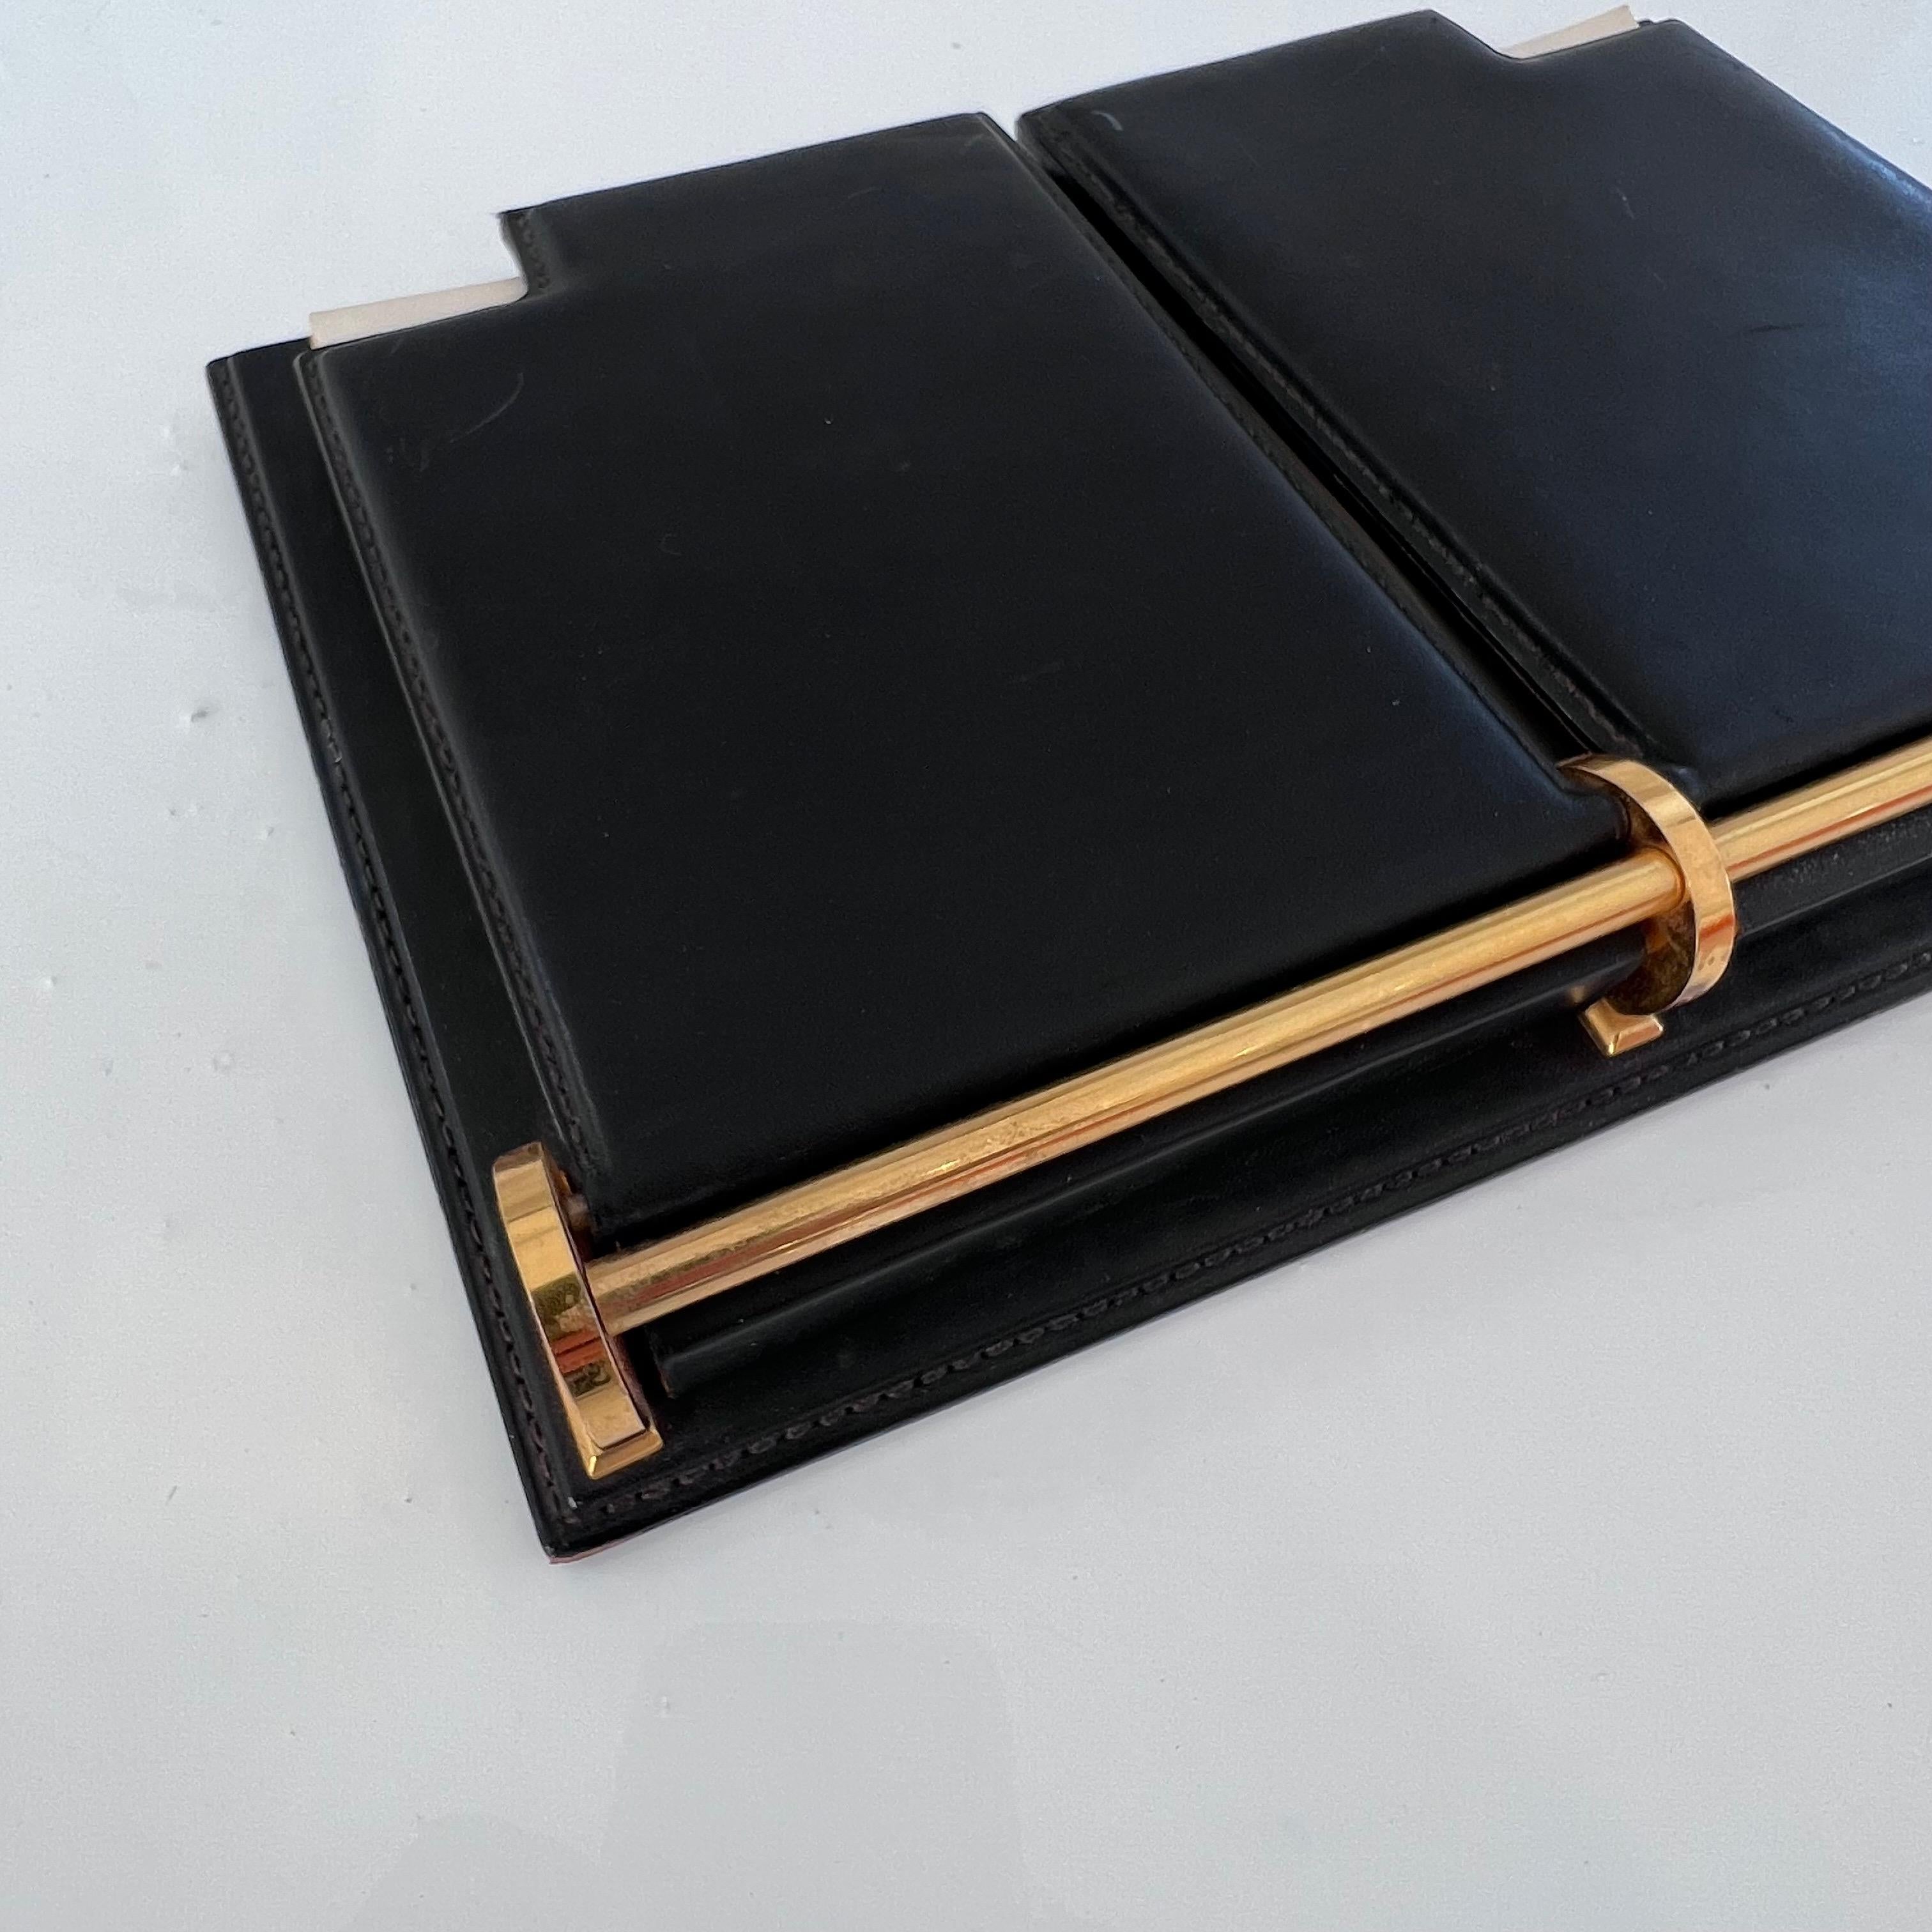 Gucci Desk Planner in Black Leather and Brass, 1970s Italy For Sale 4